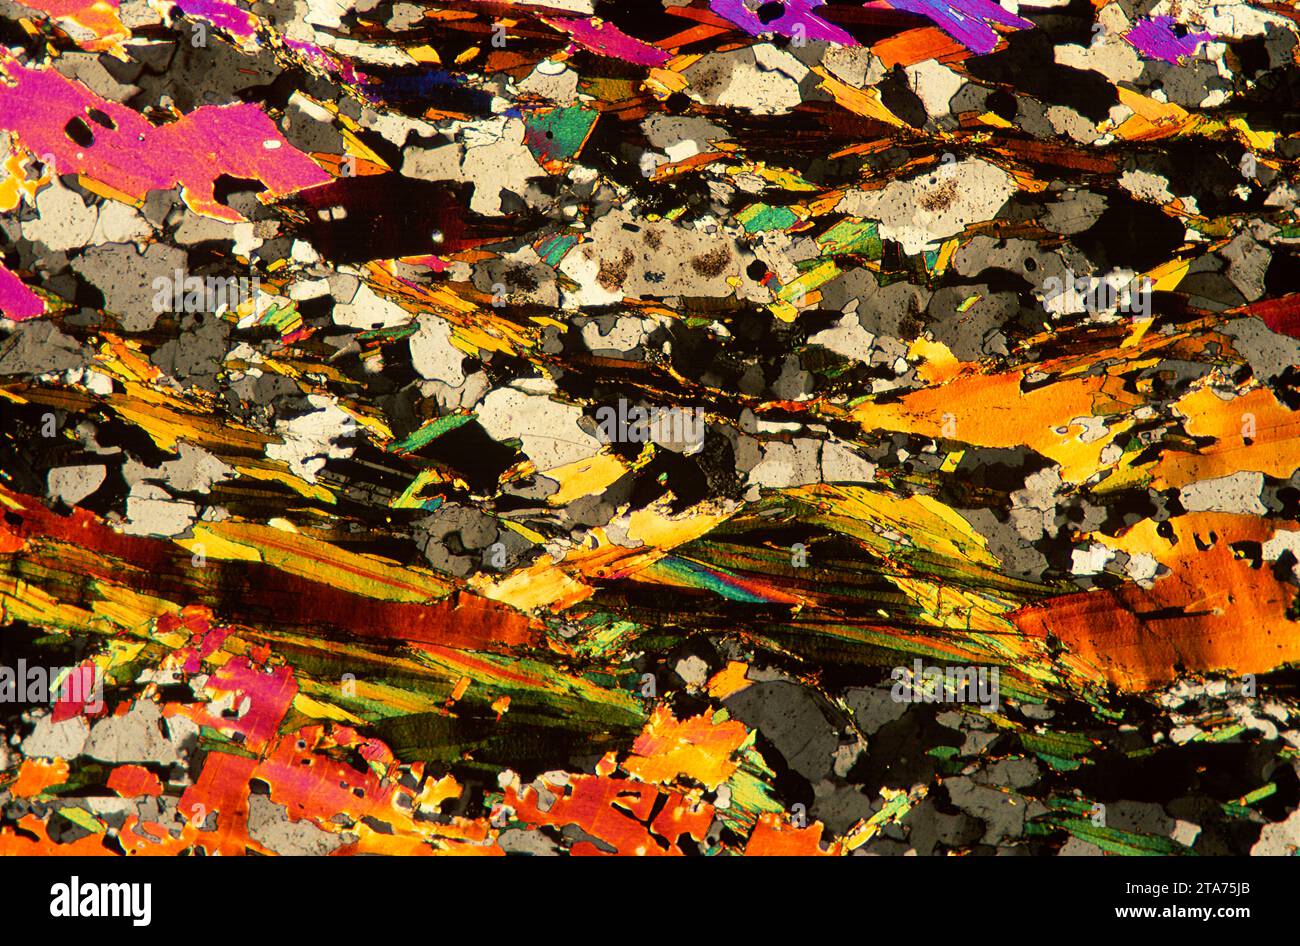 Schist, thin section showing foliation. Schist is a metamorphic rock. Optical microscope, polarised light. Magnification X20. Stock Photo